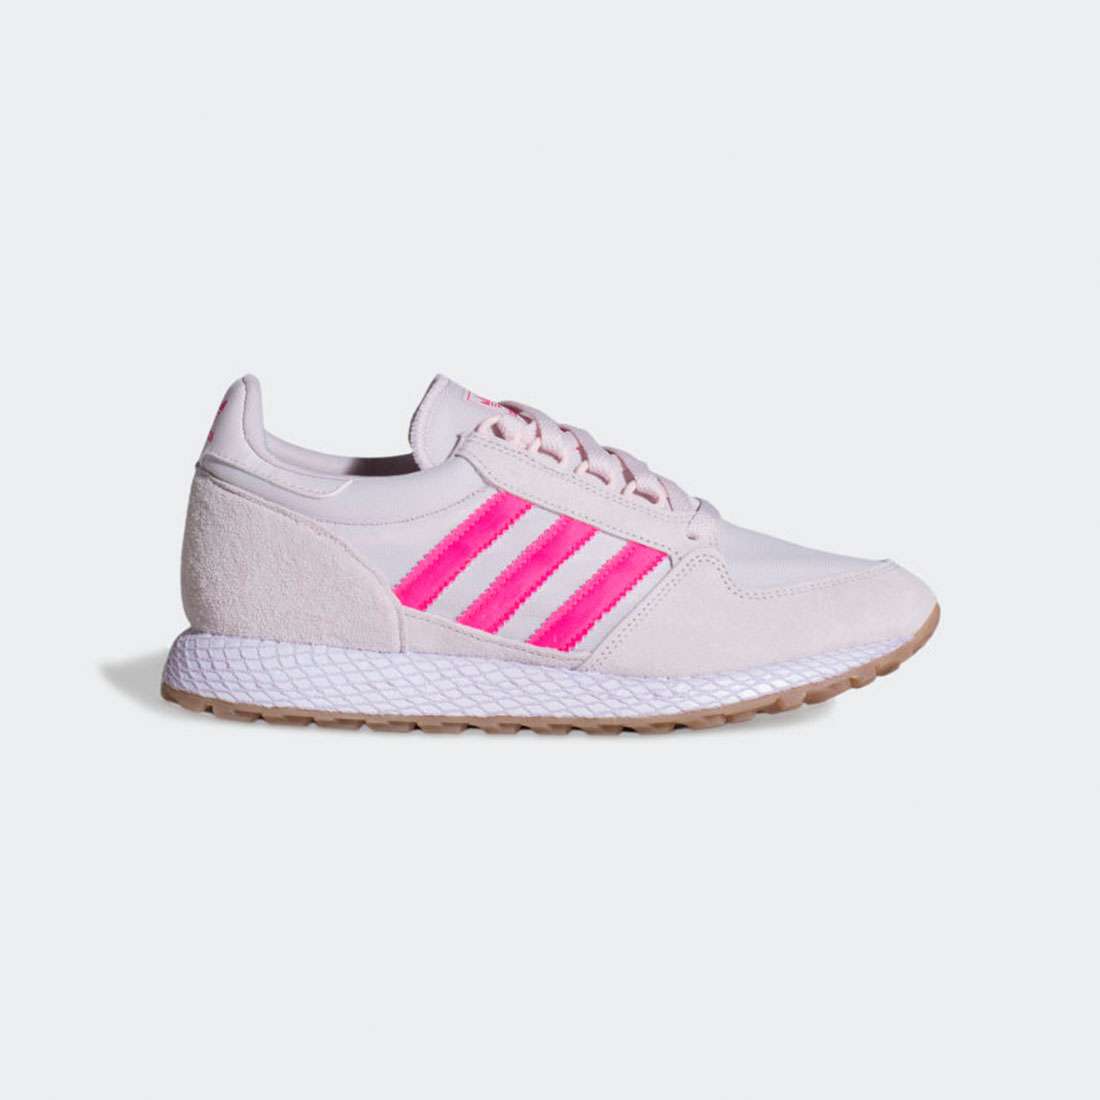 ADIDAS FOREST GROVE W WHITE/PINK